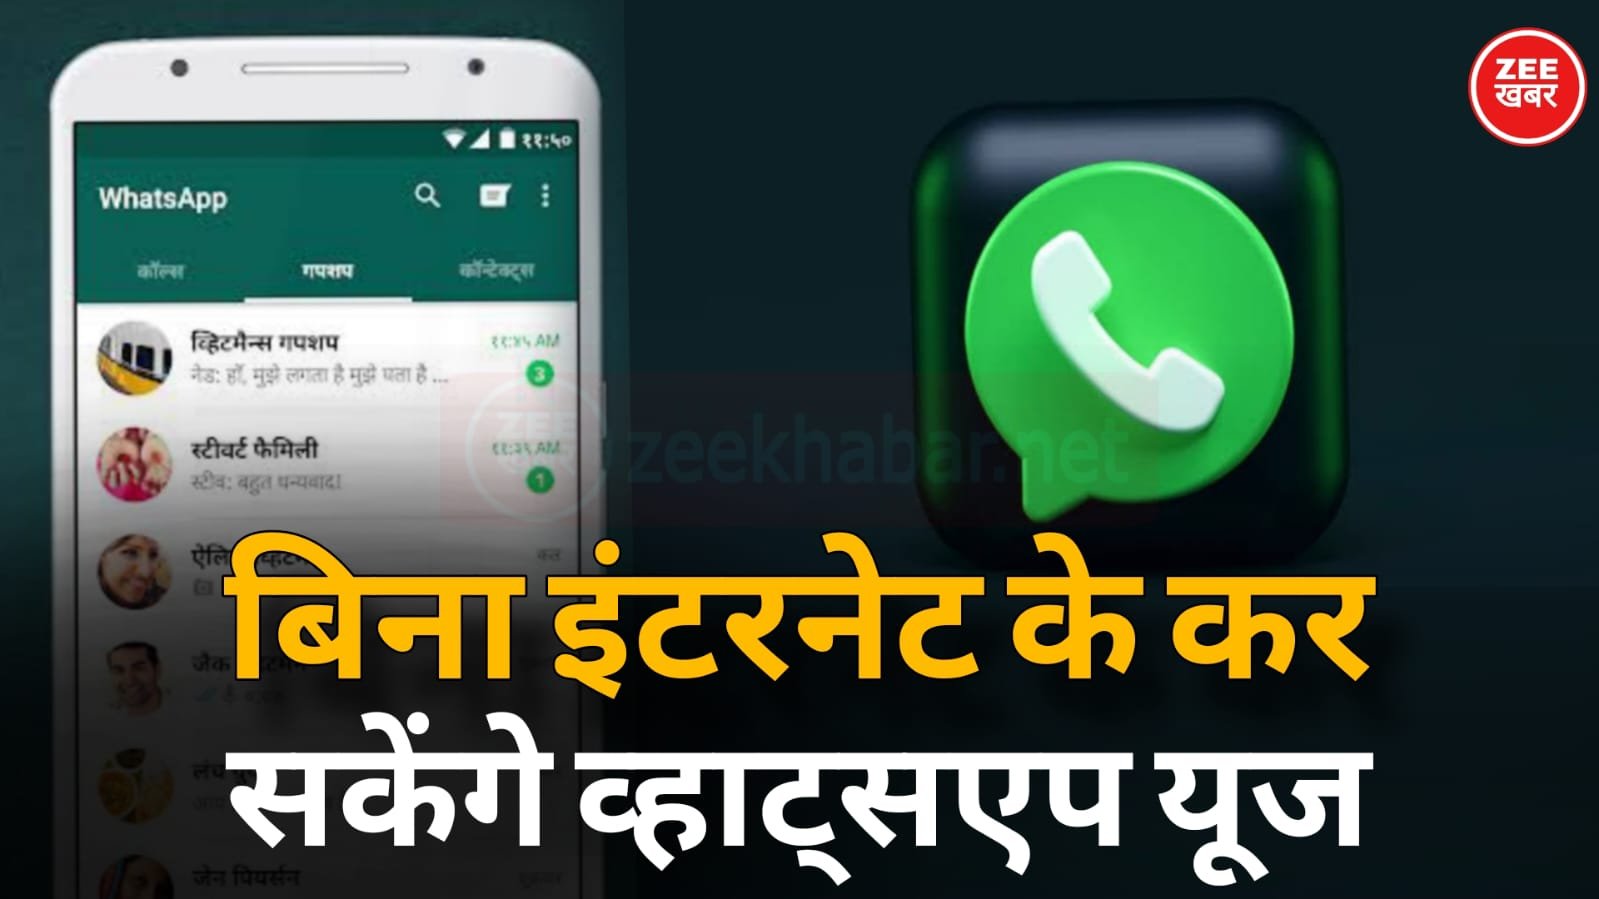 WhatsApp Proxy Features